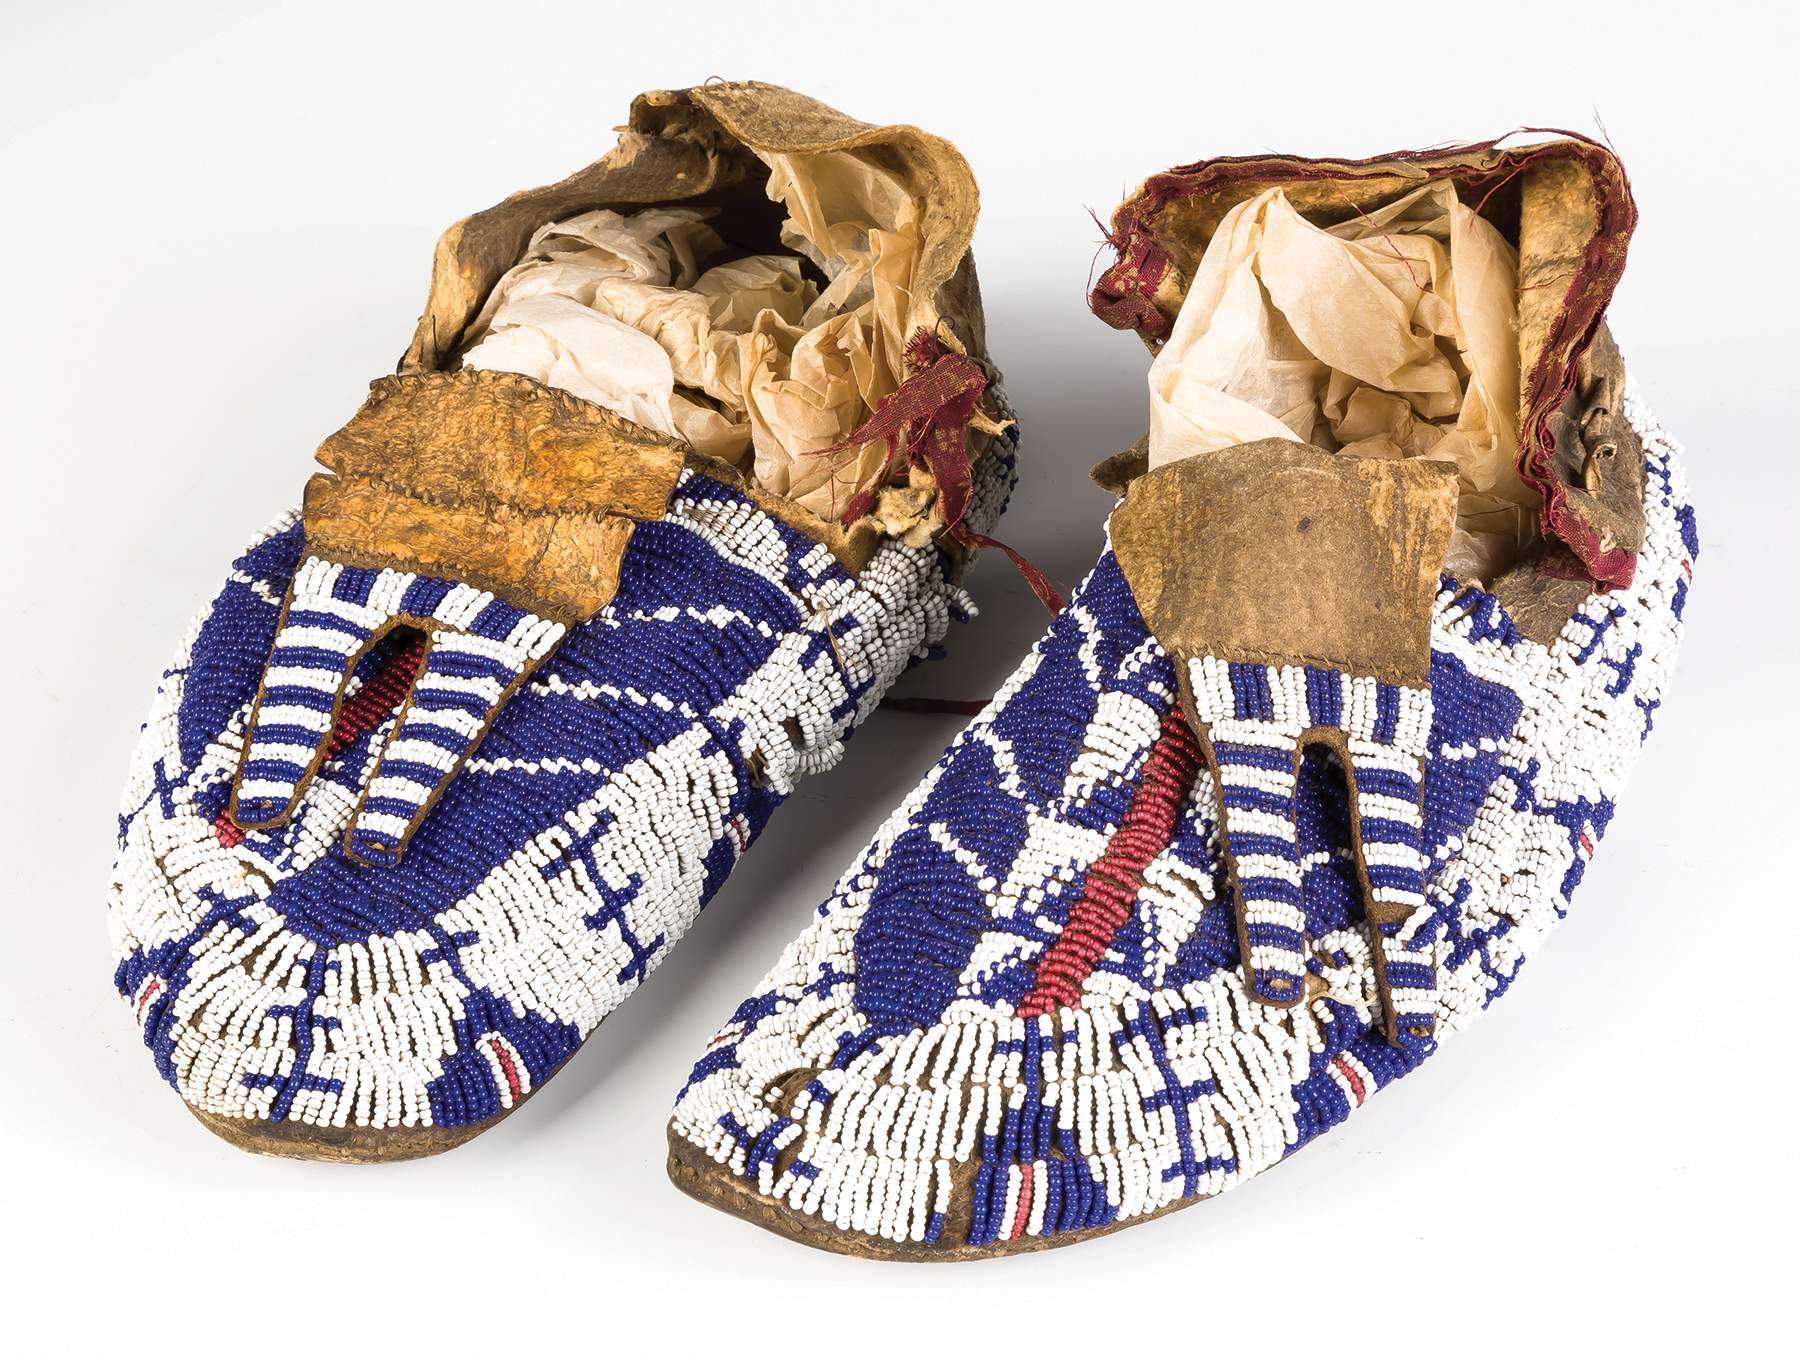 sioux moccasins